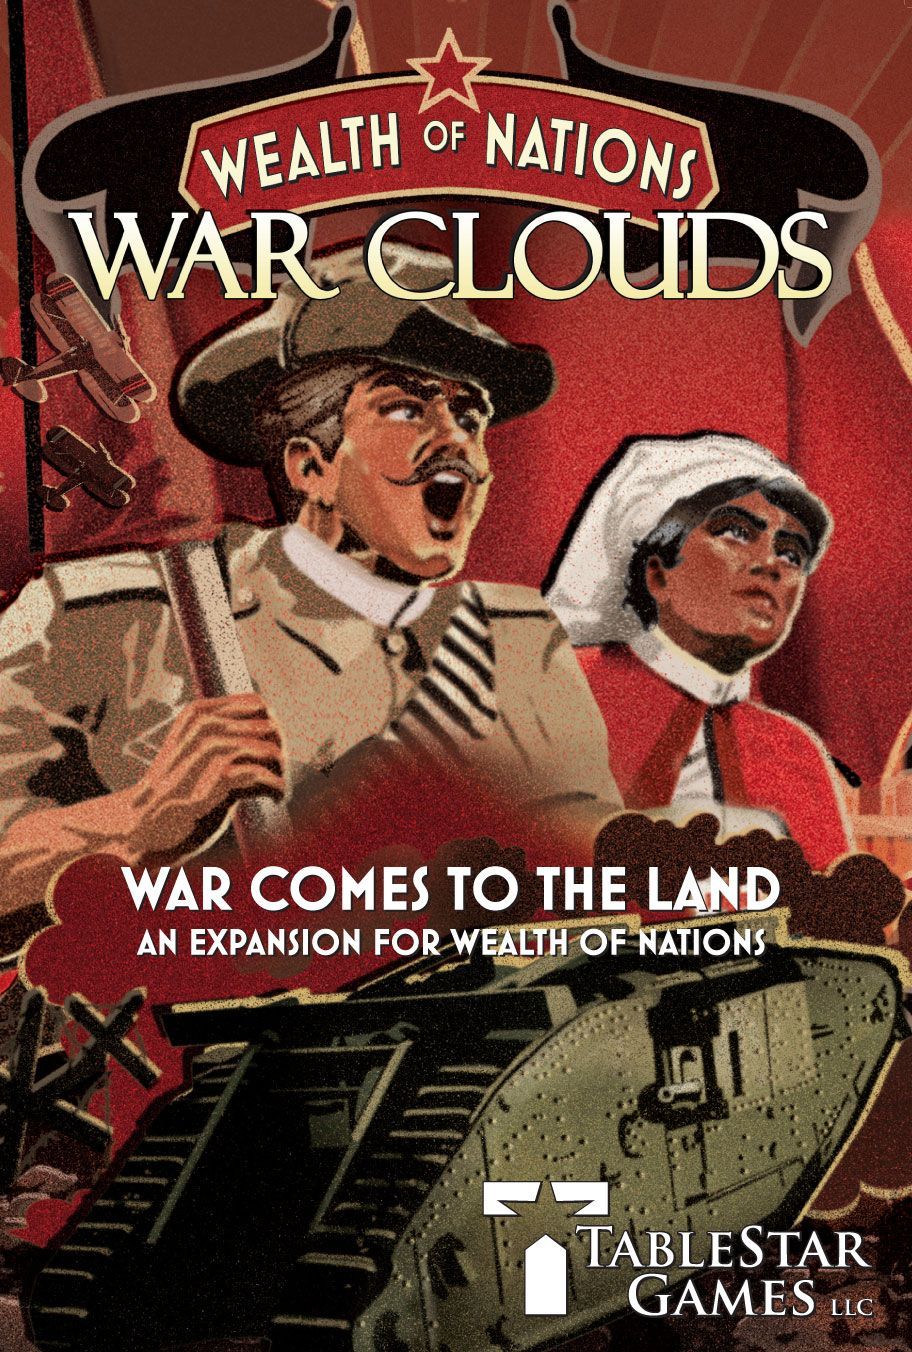 Wealth of Nations: War Clouds